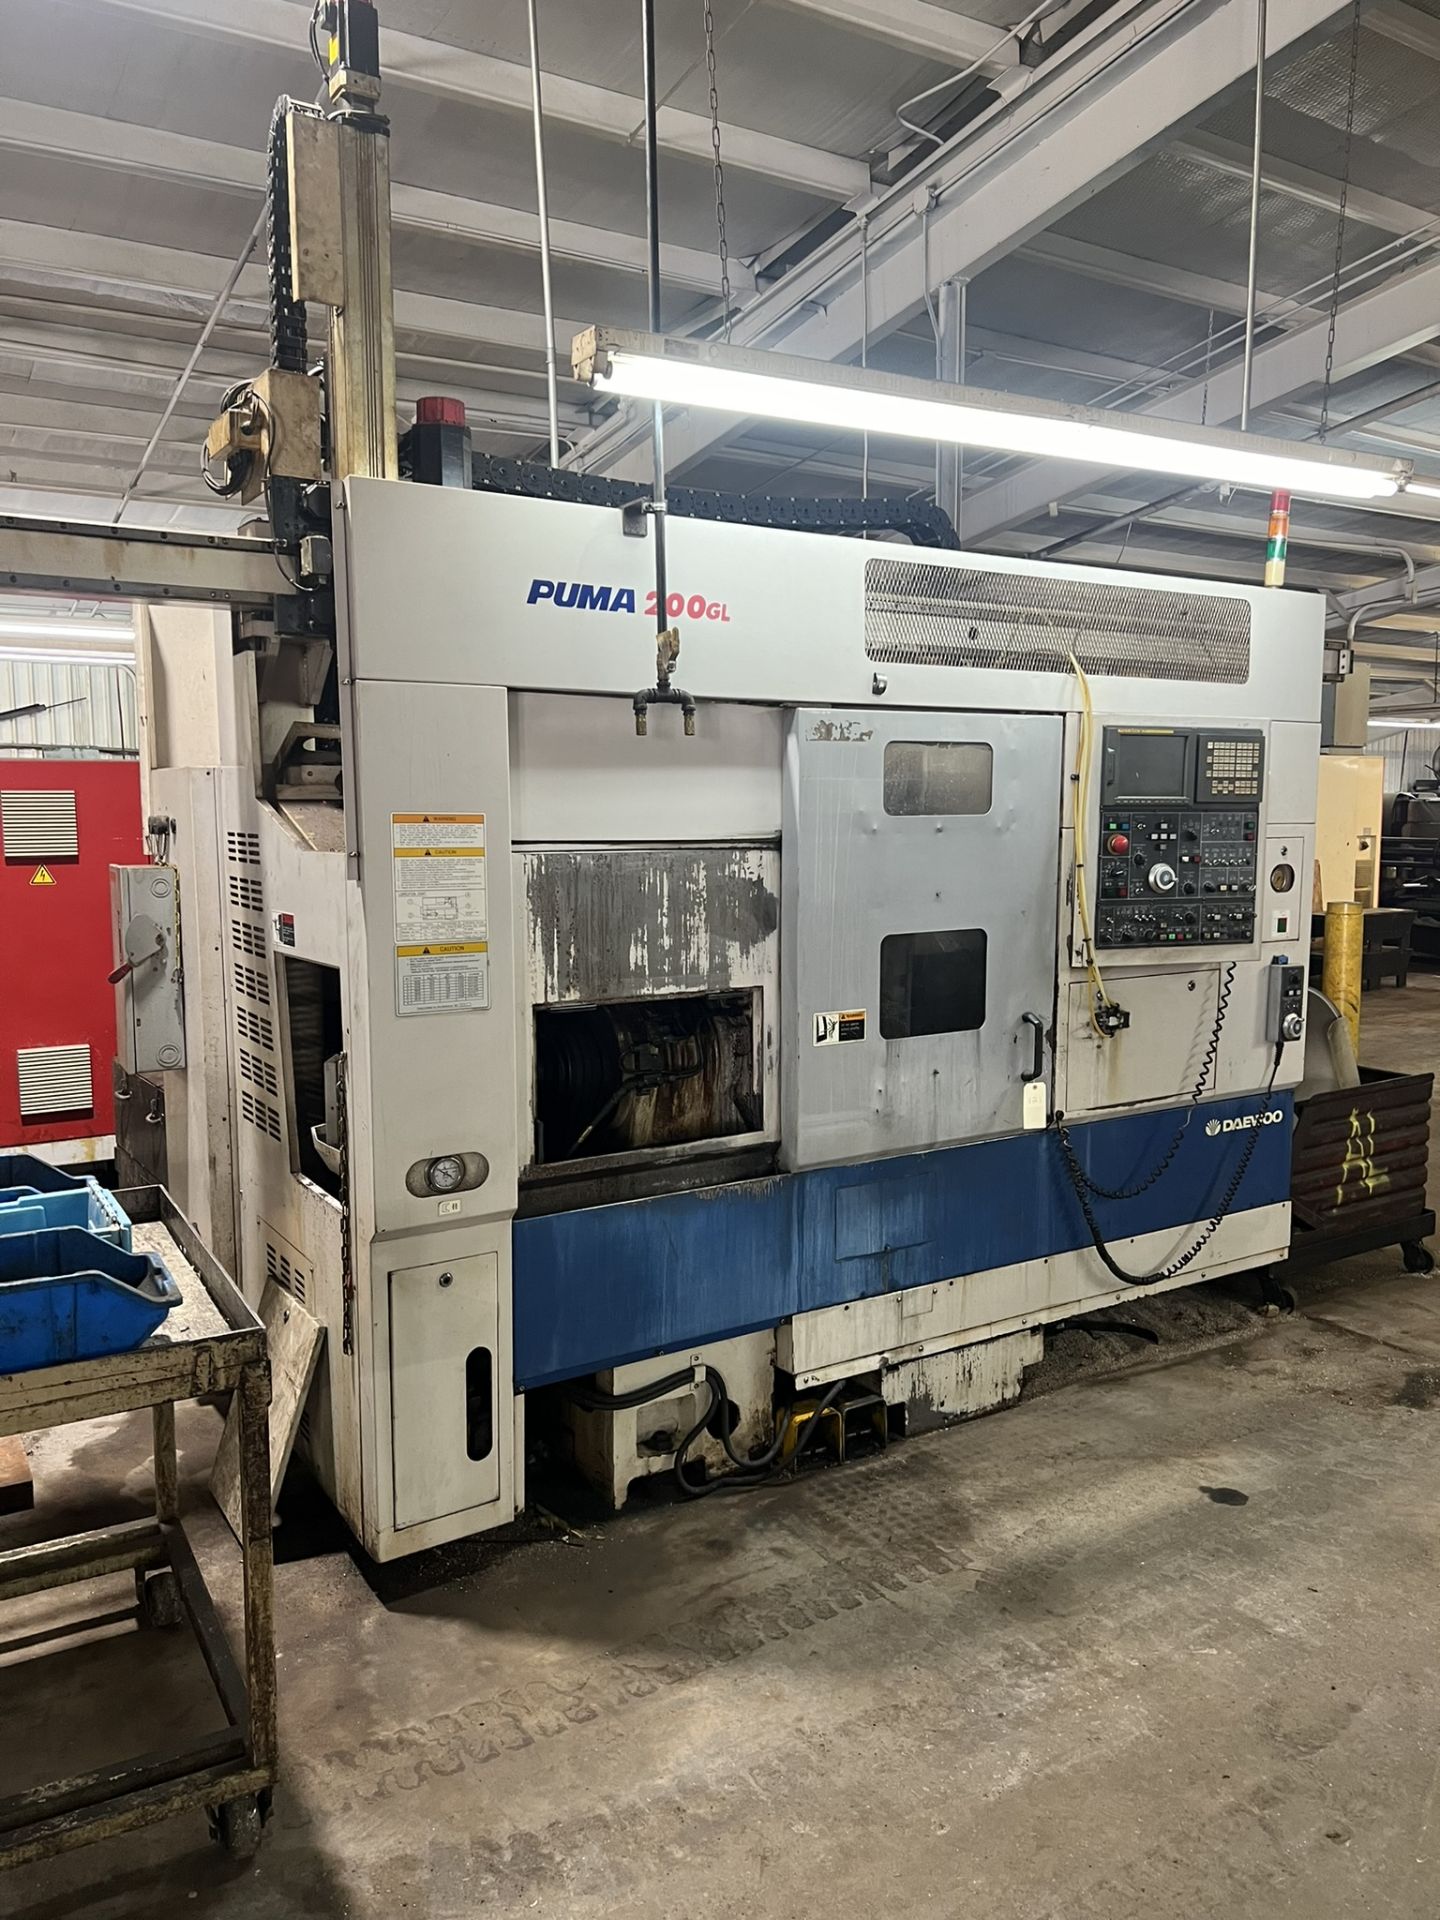 2001 Daewoo Puma 200GL CNC, with chip conveyor, does not power on Model #200LC, Serial#